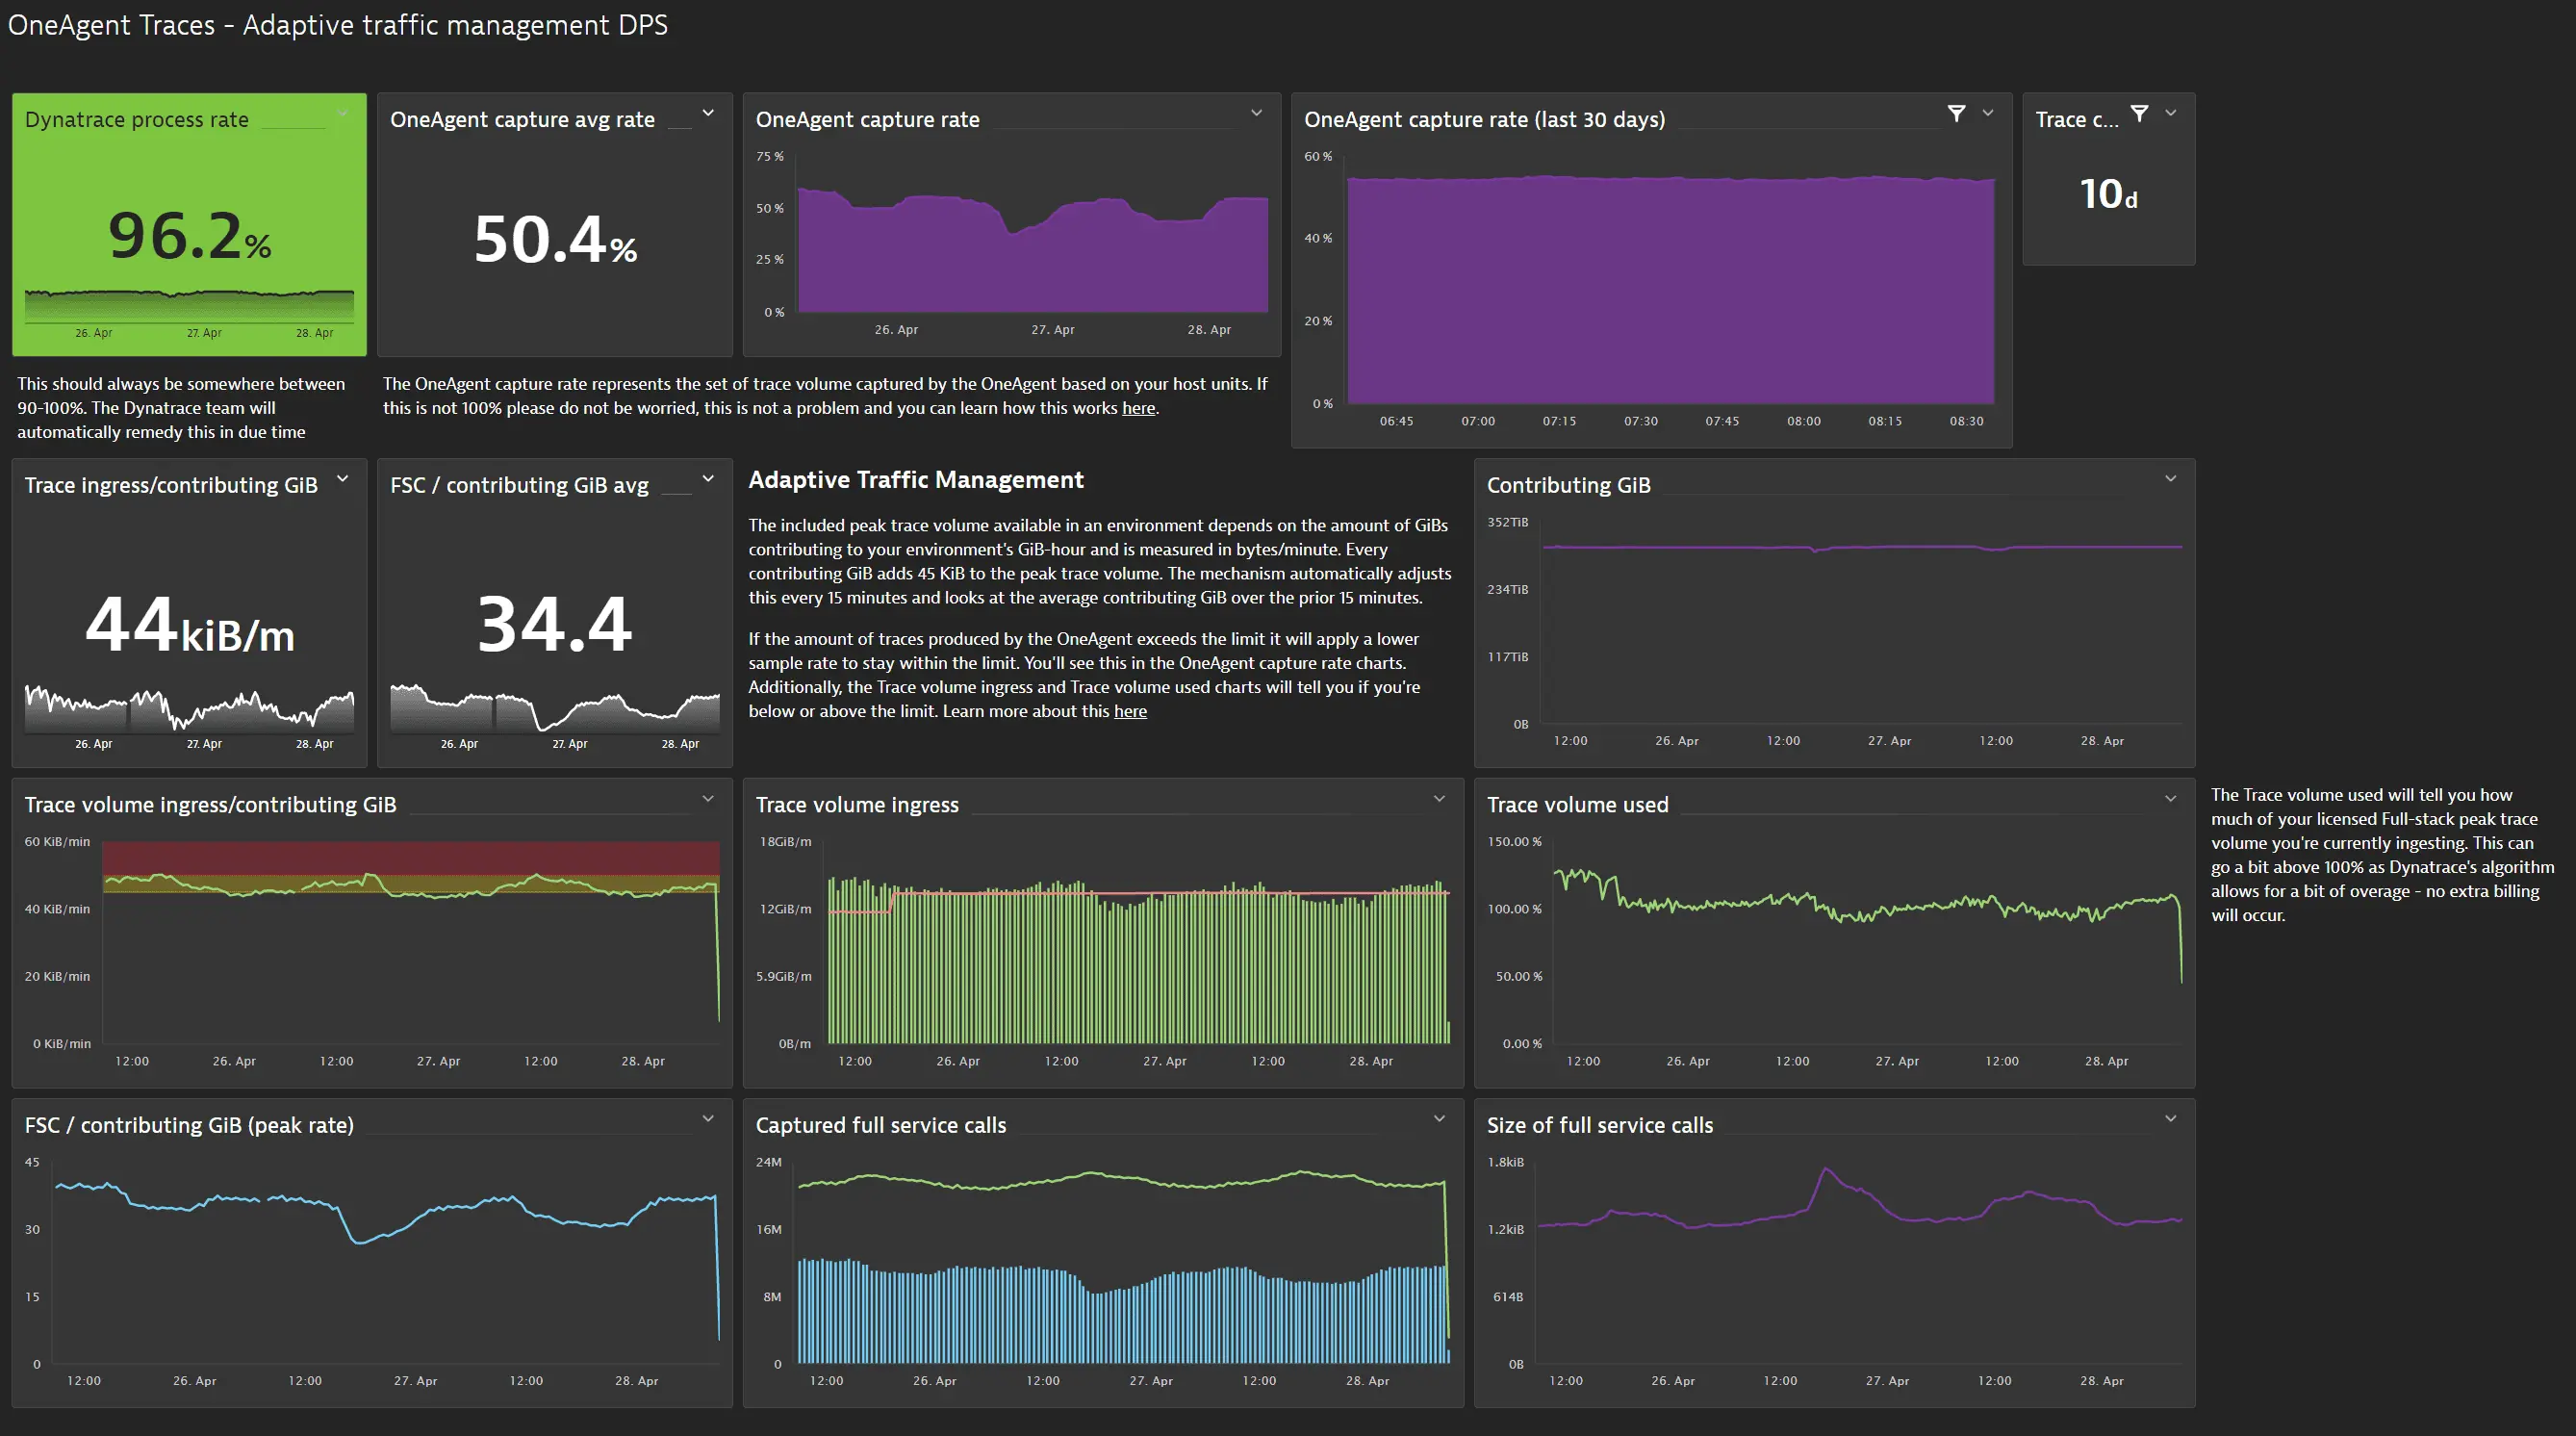 Monitoring dashboard for ATMv3 in DPS